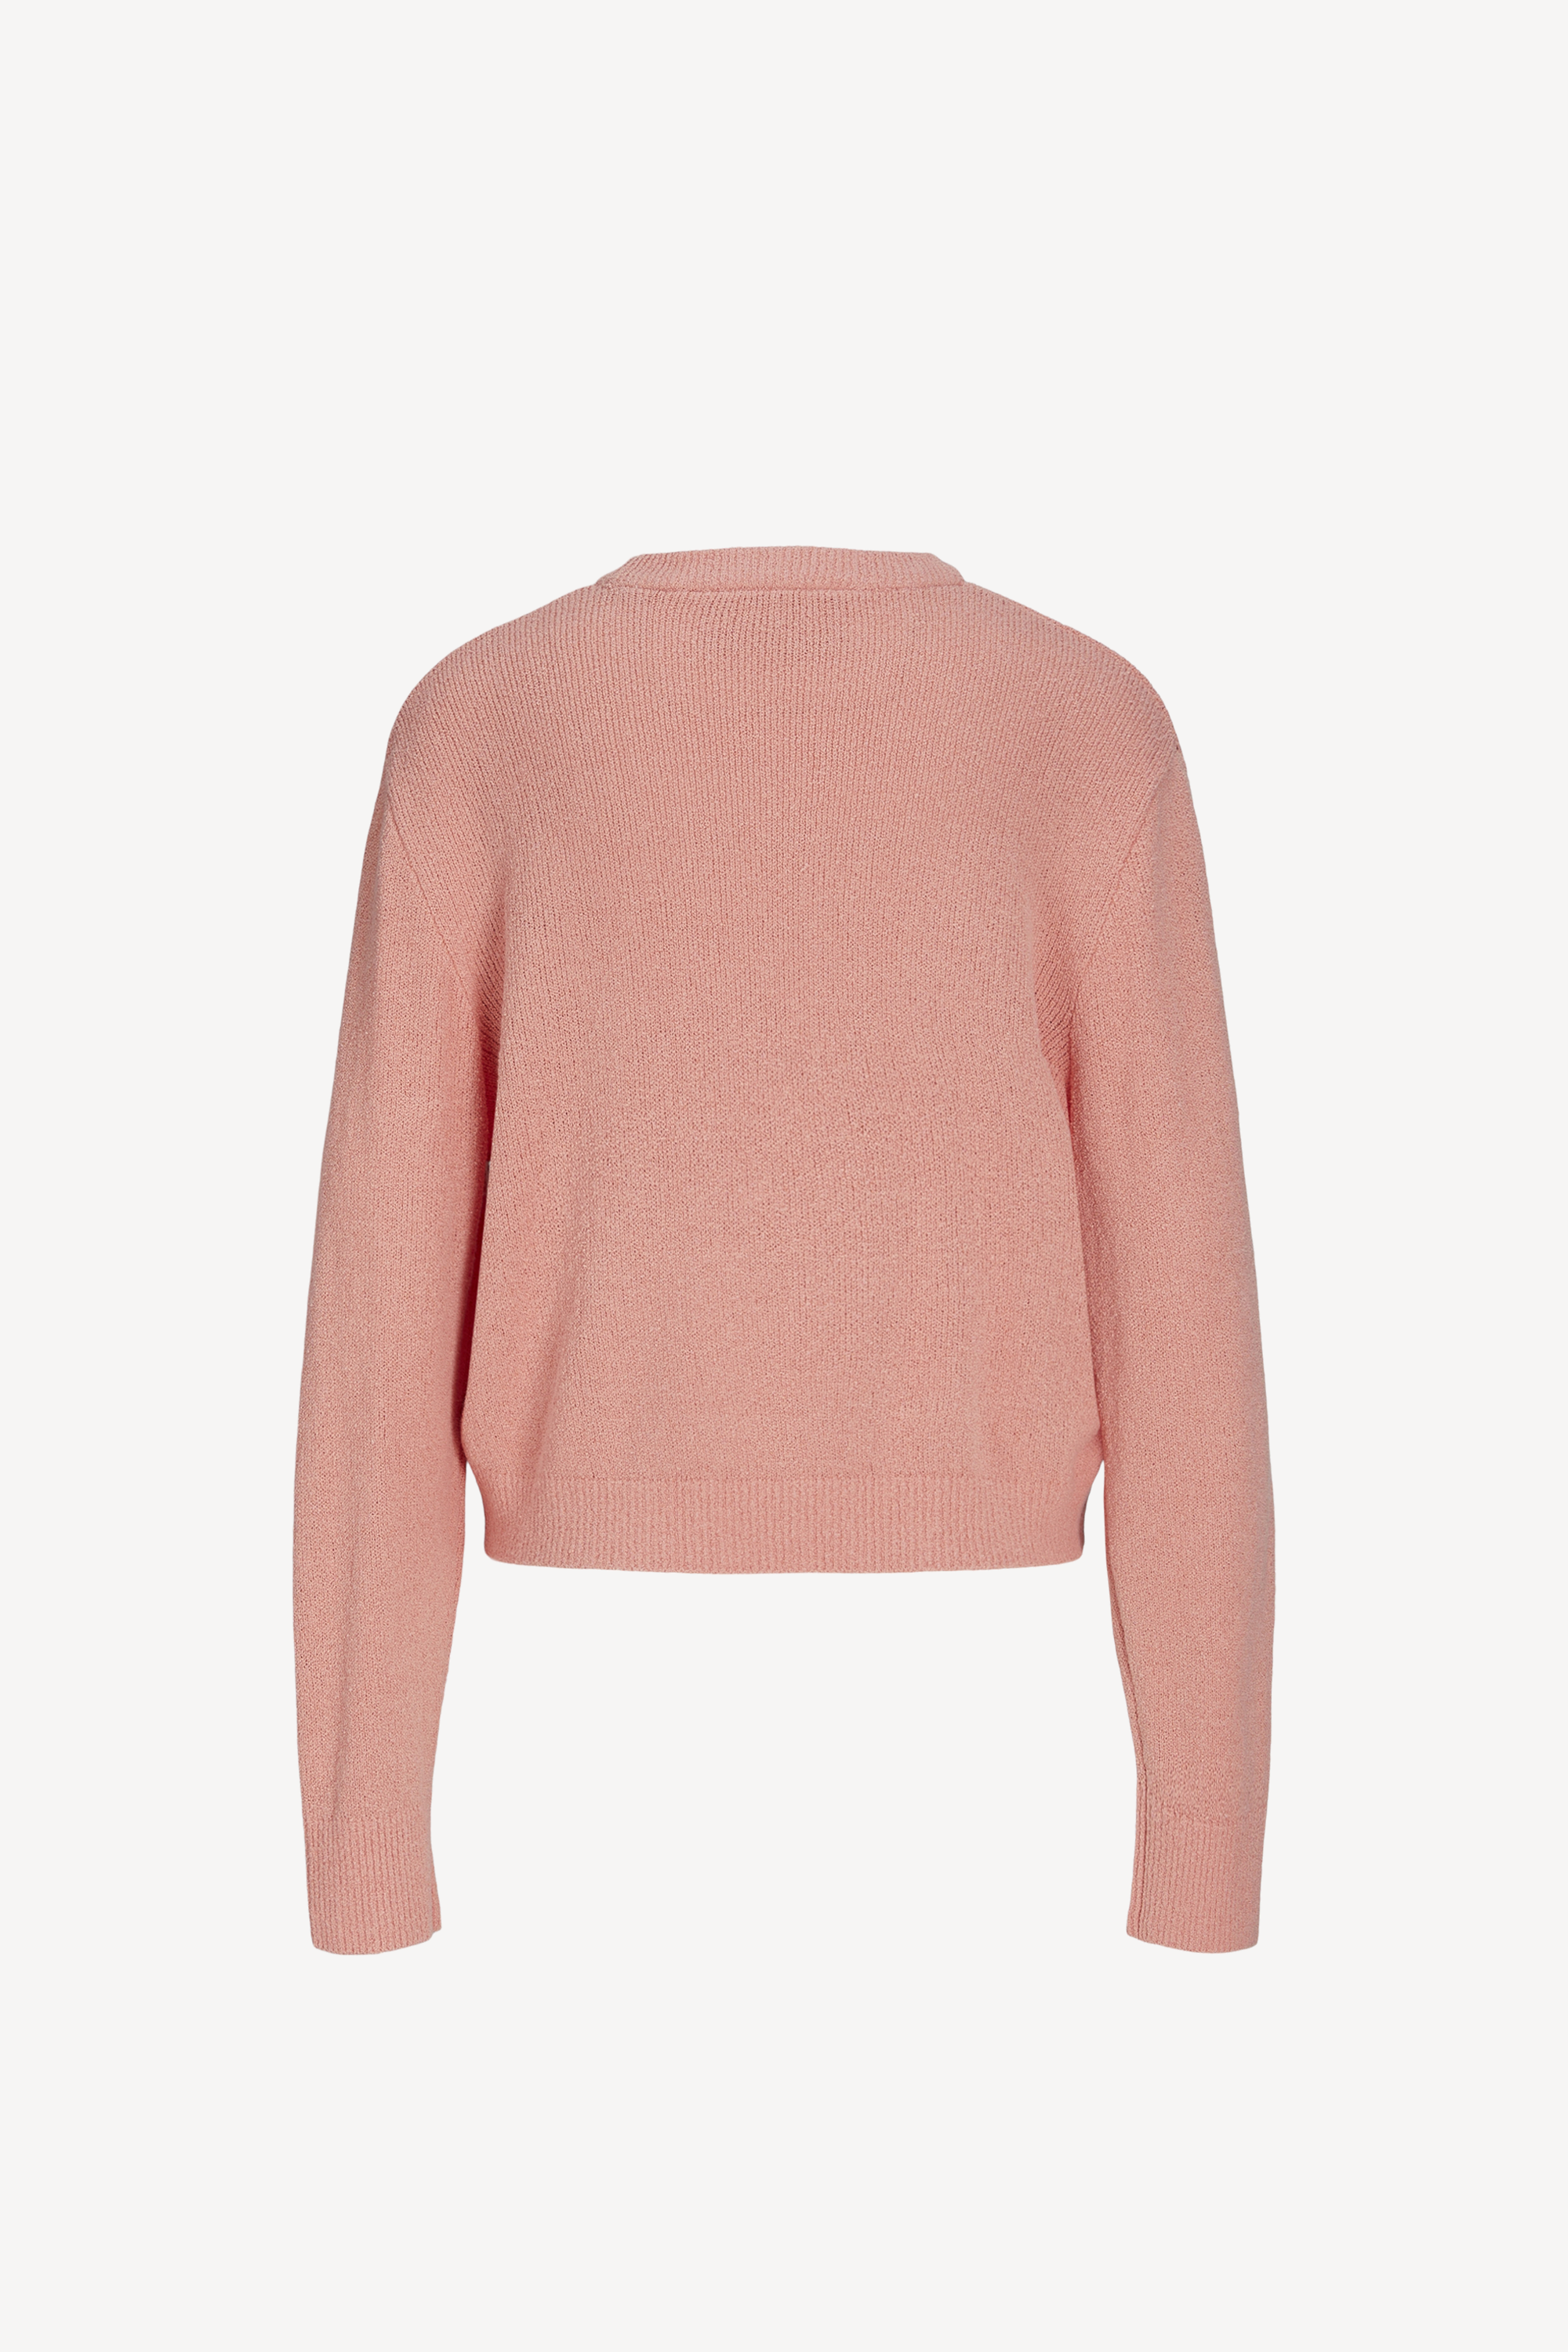 Daisy Crew Neck Knit Burnt Coral